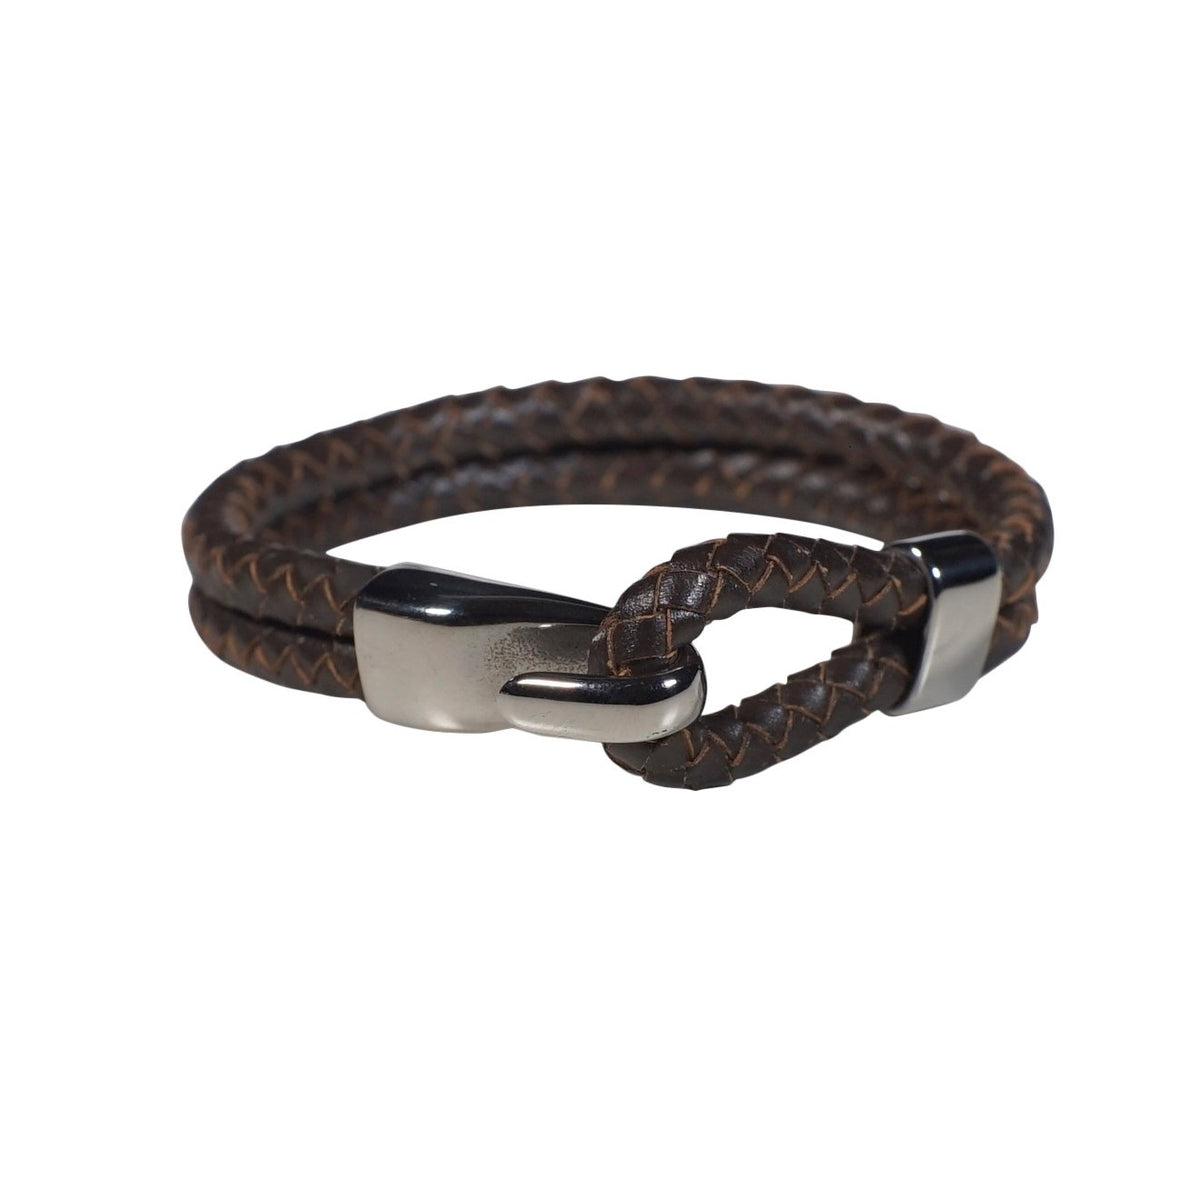 Oxford Leather Bracelet in Brown (Size M) - Nomad Watch Works Malaysia